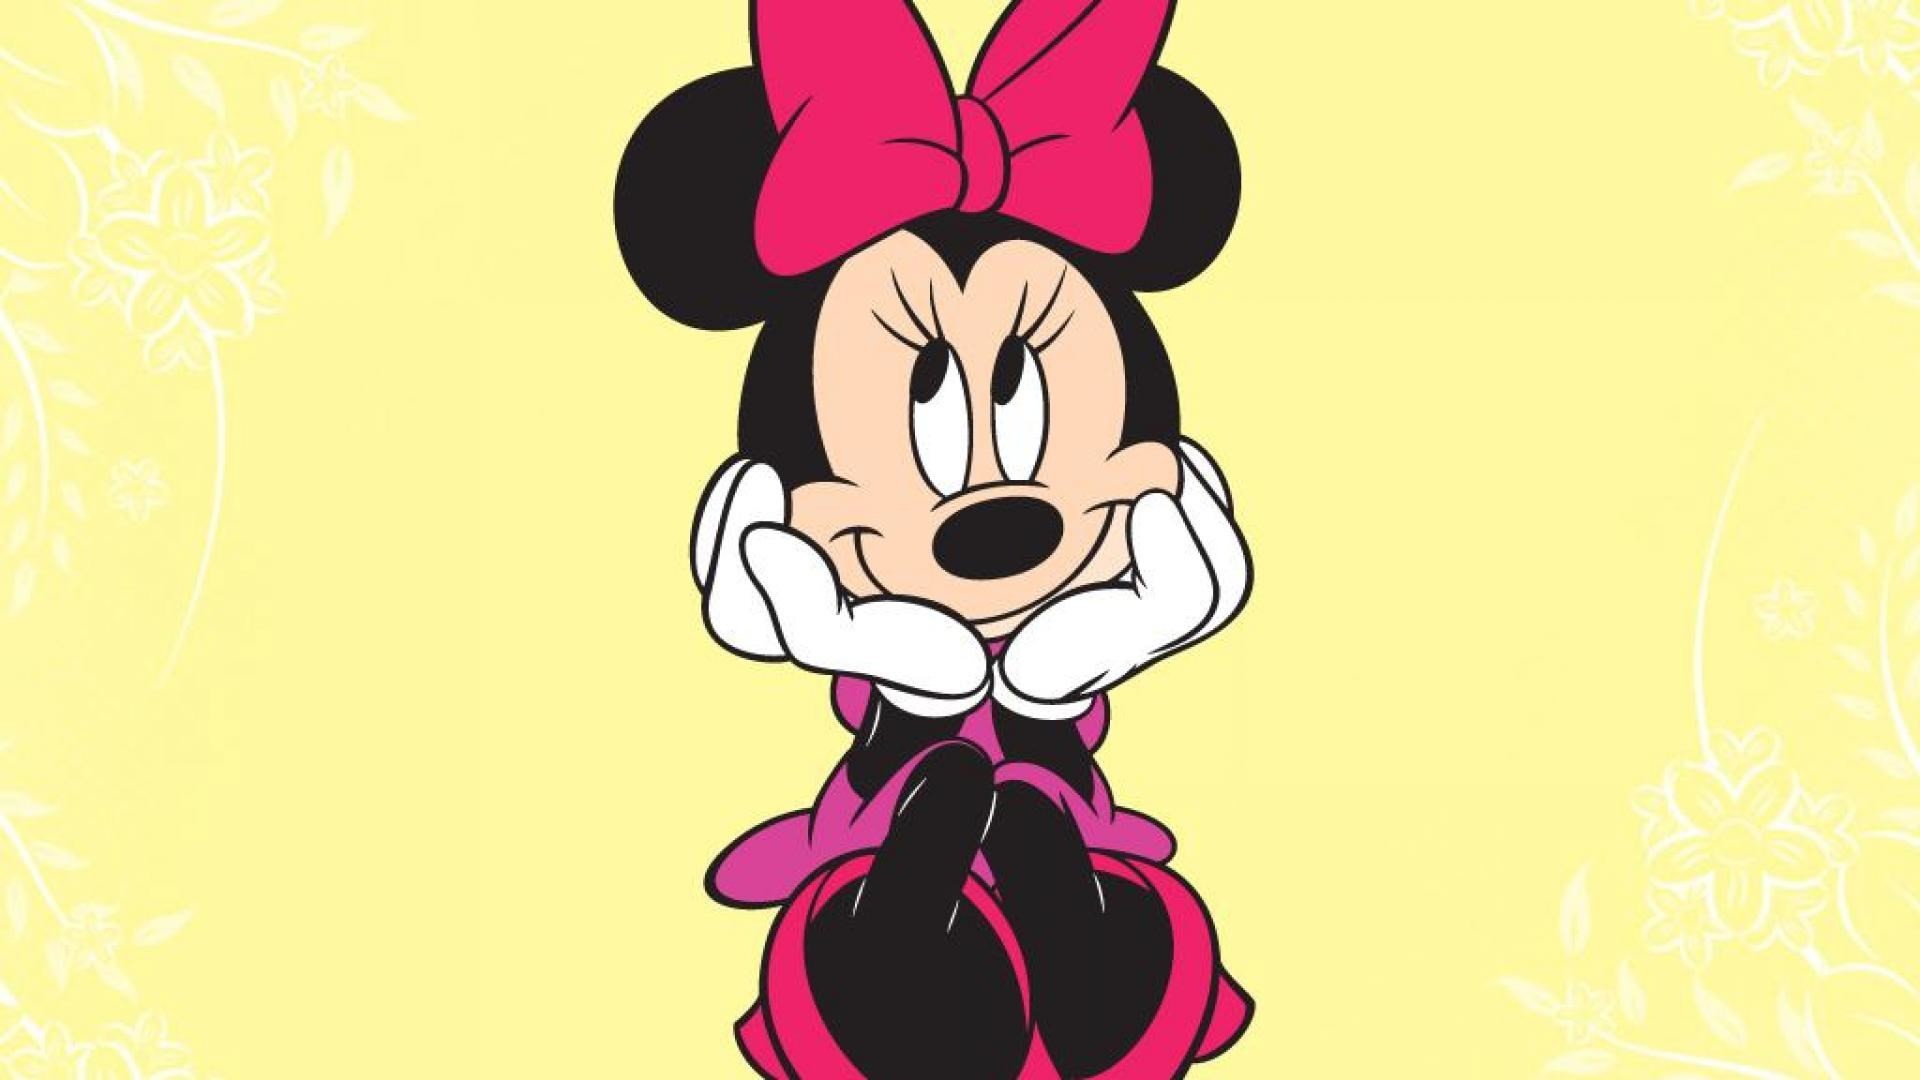 1920x1080 cartoon download minnie mouse wallpapers hd | bzwallpapers.xyz | Pinterest  | Minnie mouse, Tapety a KreslenÃ½ film